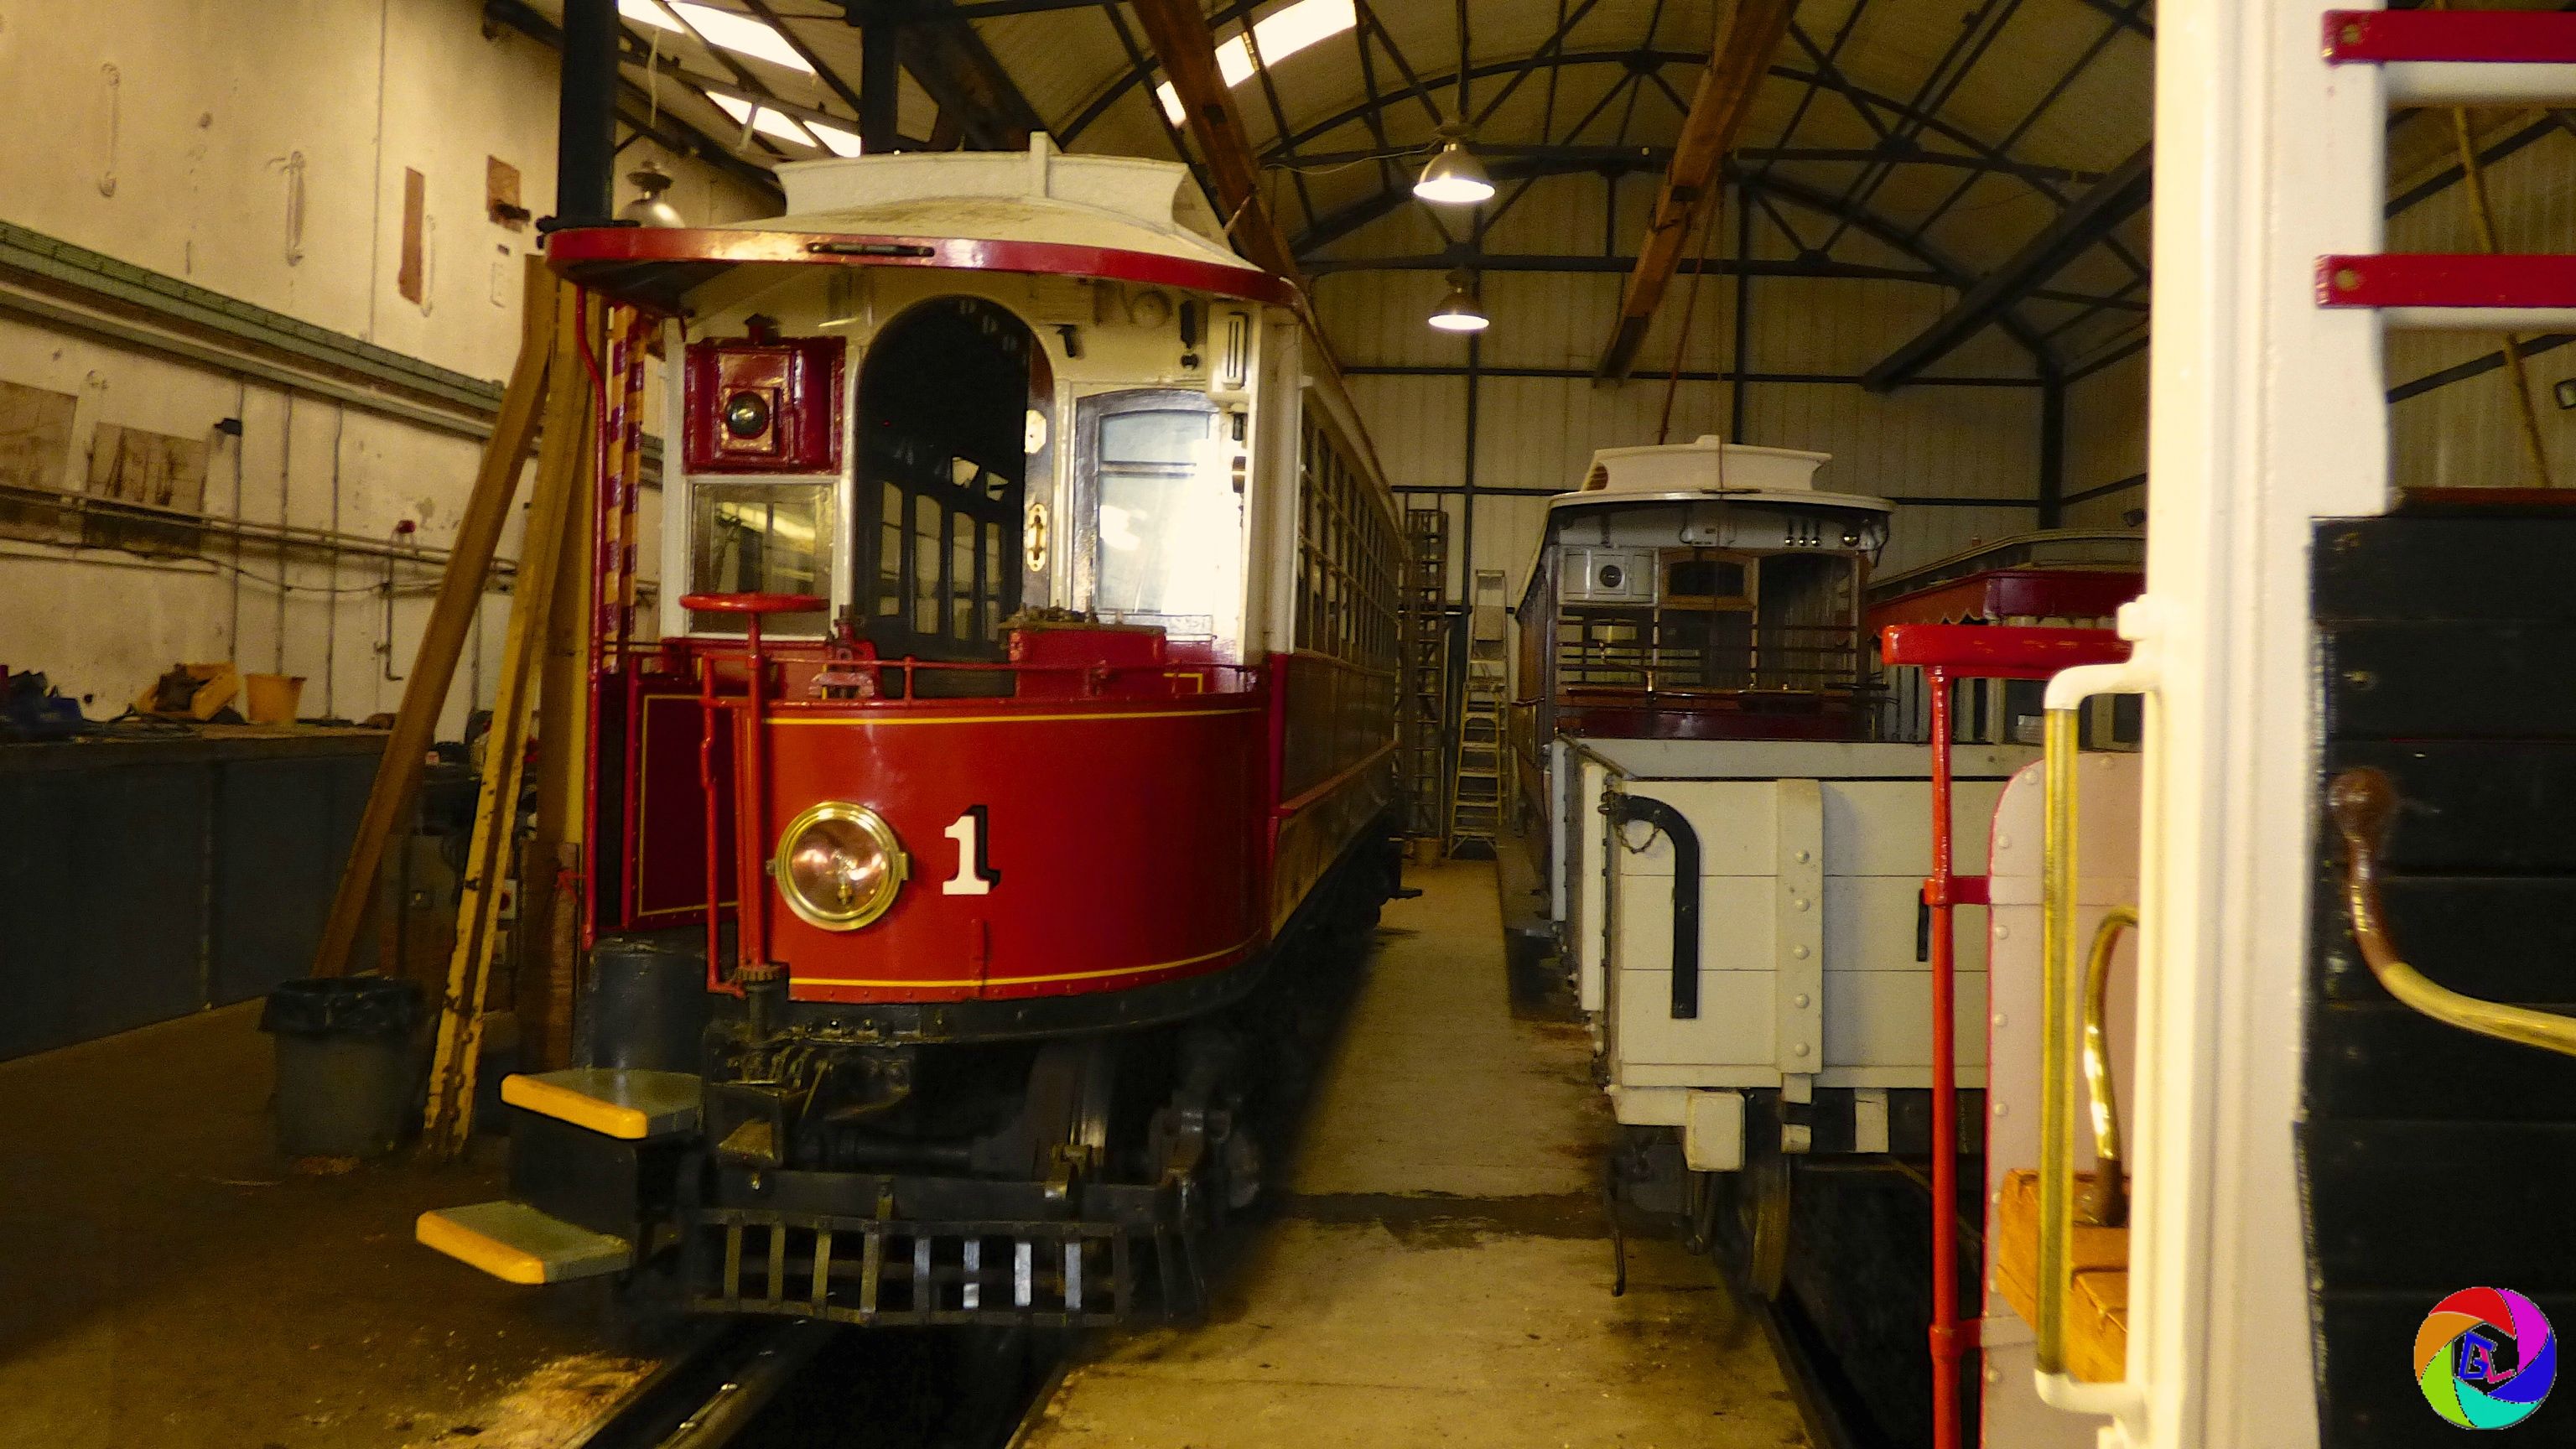 Tram 1, the oldest tram car still in operation in world, from 1890s